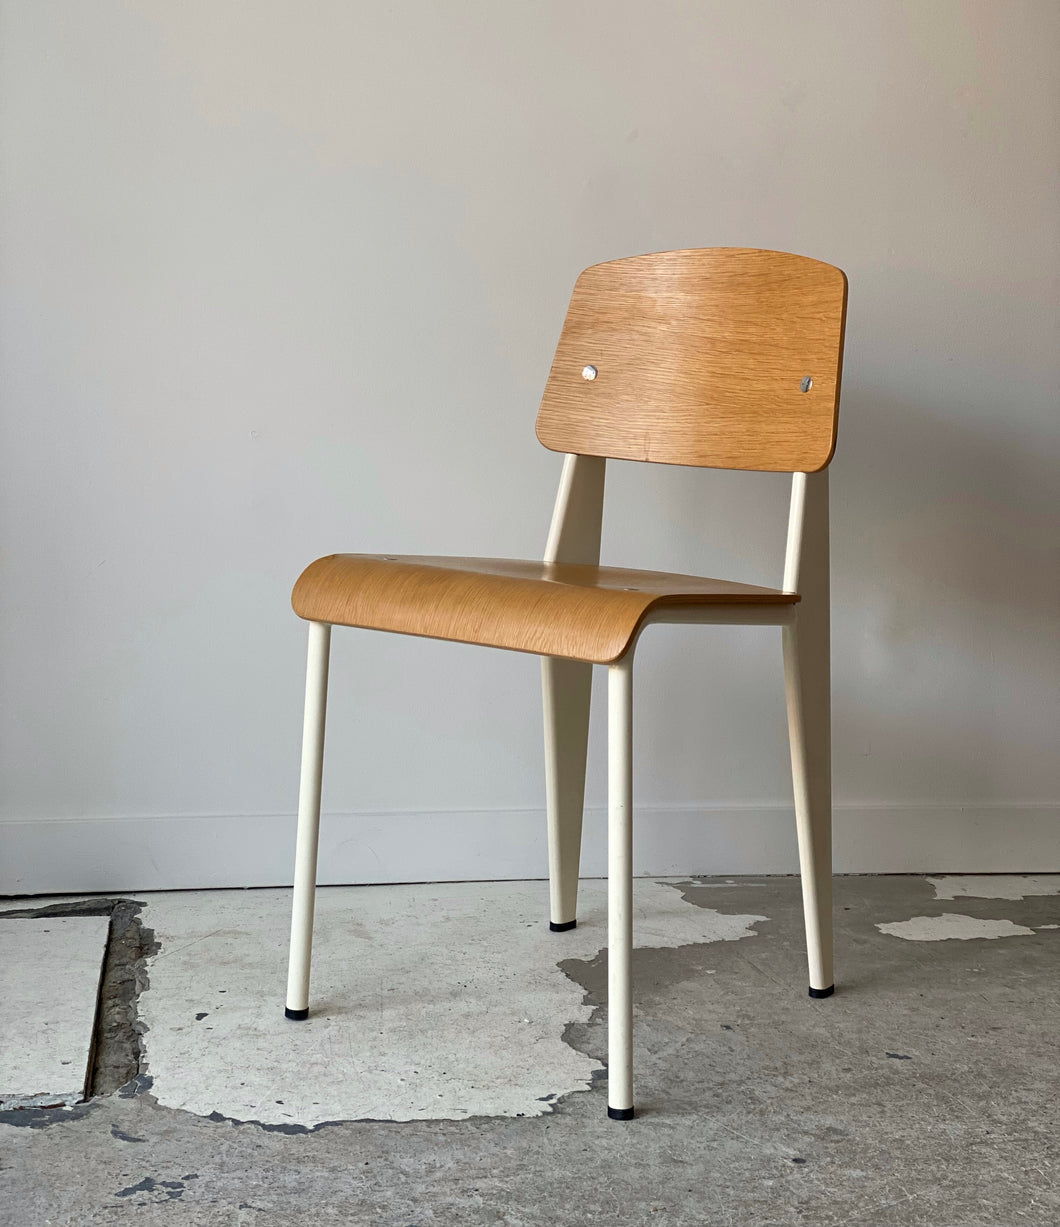 Standard chair by Jean Prouvé for Vitra